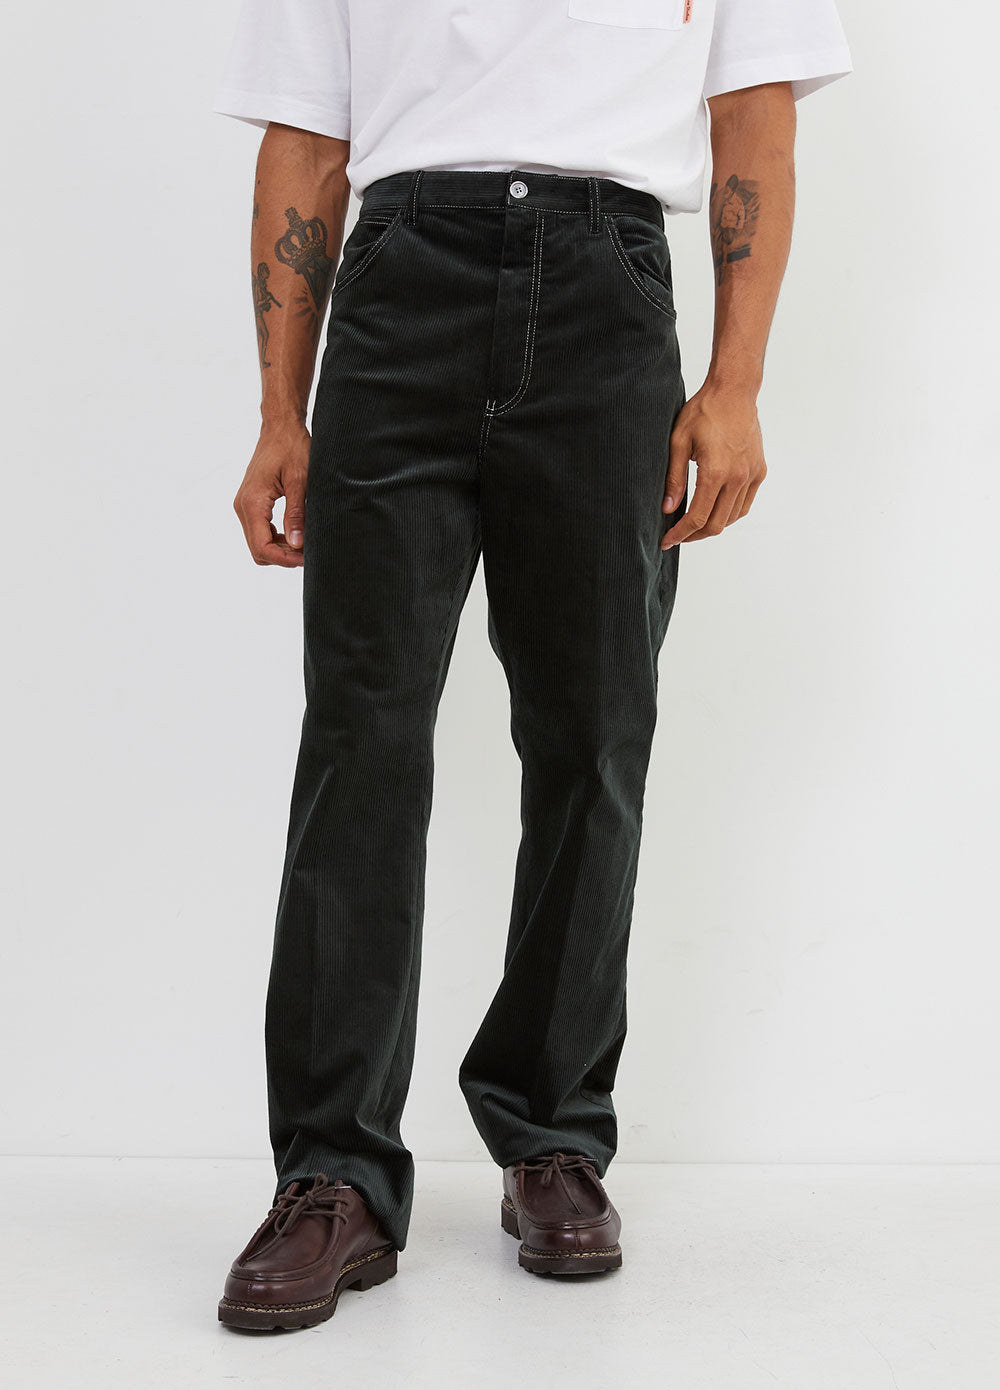 Philly Cord Trousers